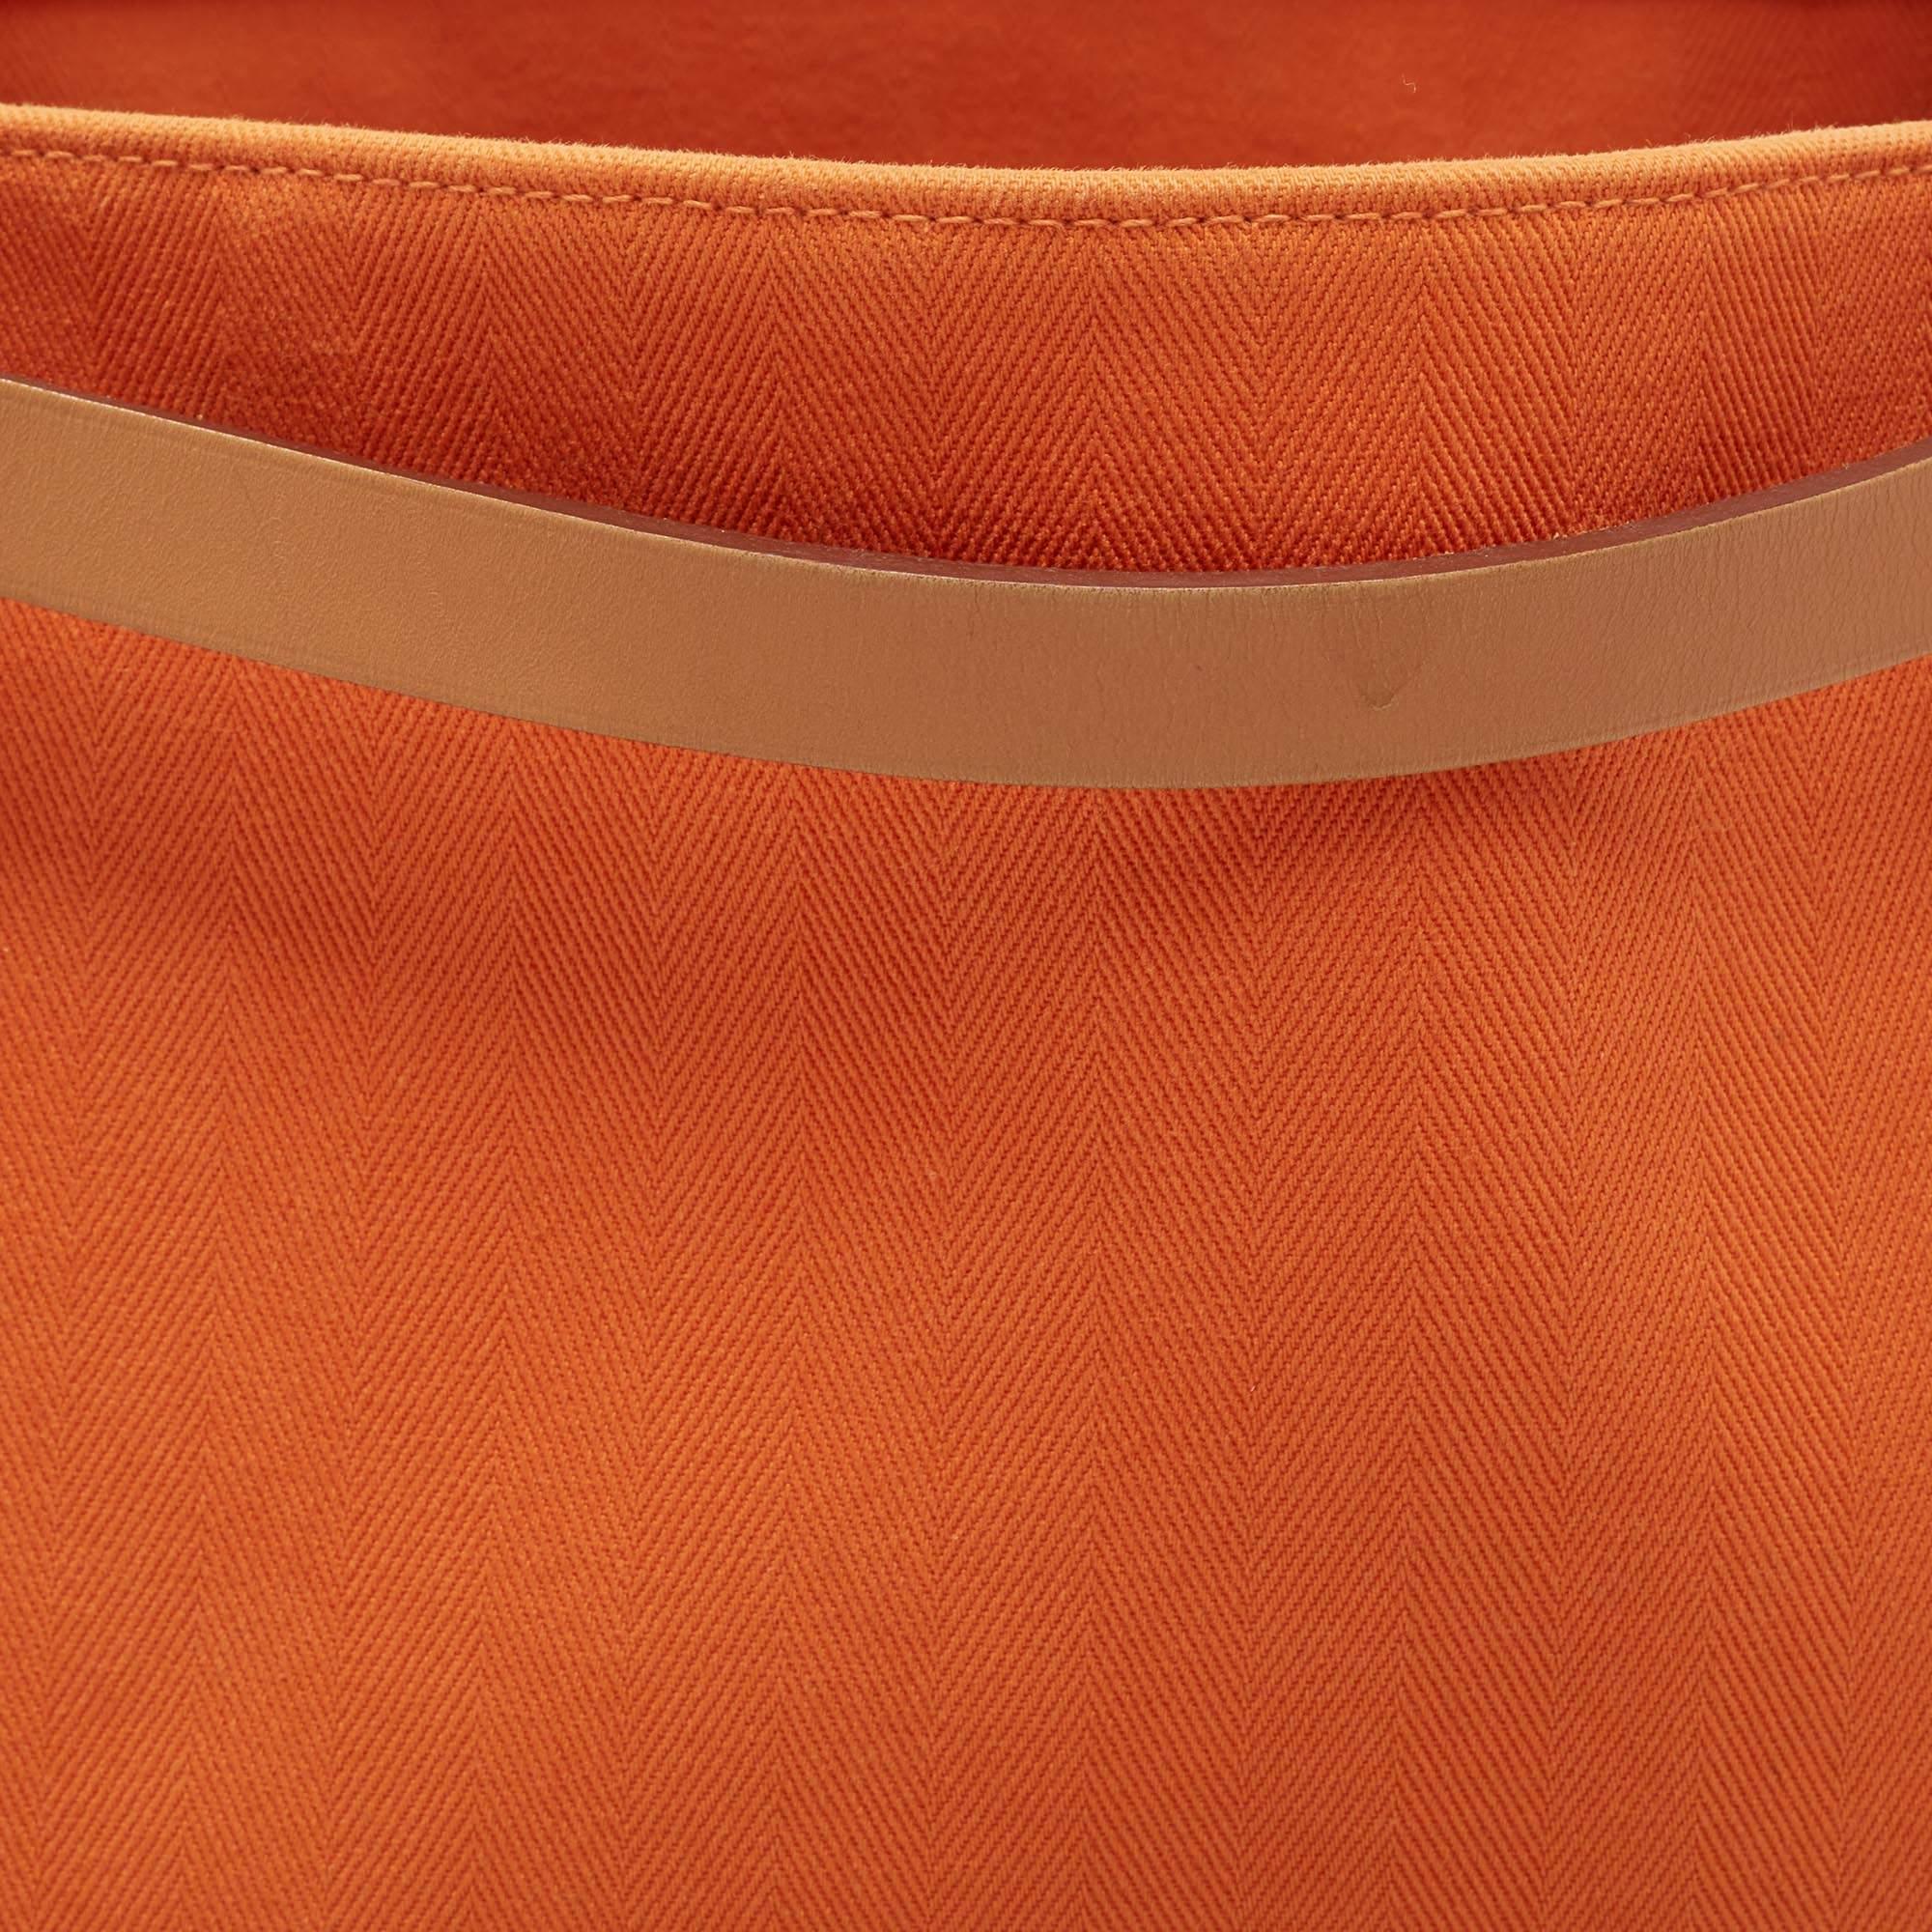 Hermes Orange/Natural Canvas and Leather Cabalicol Bag 9